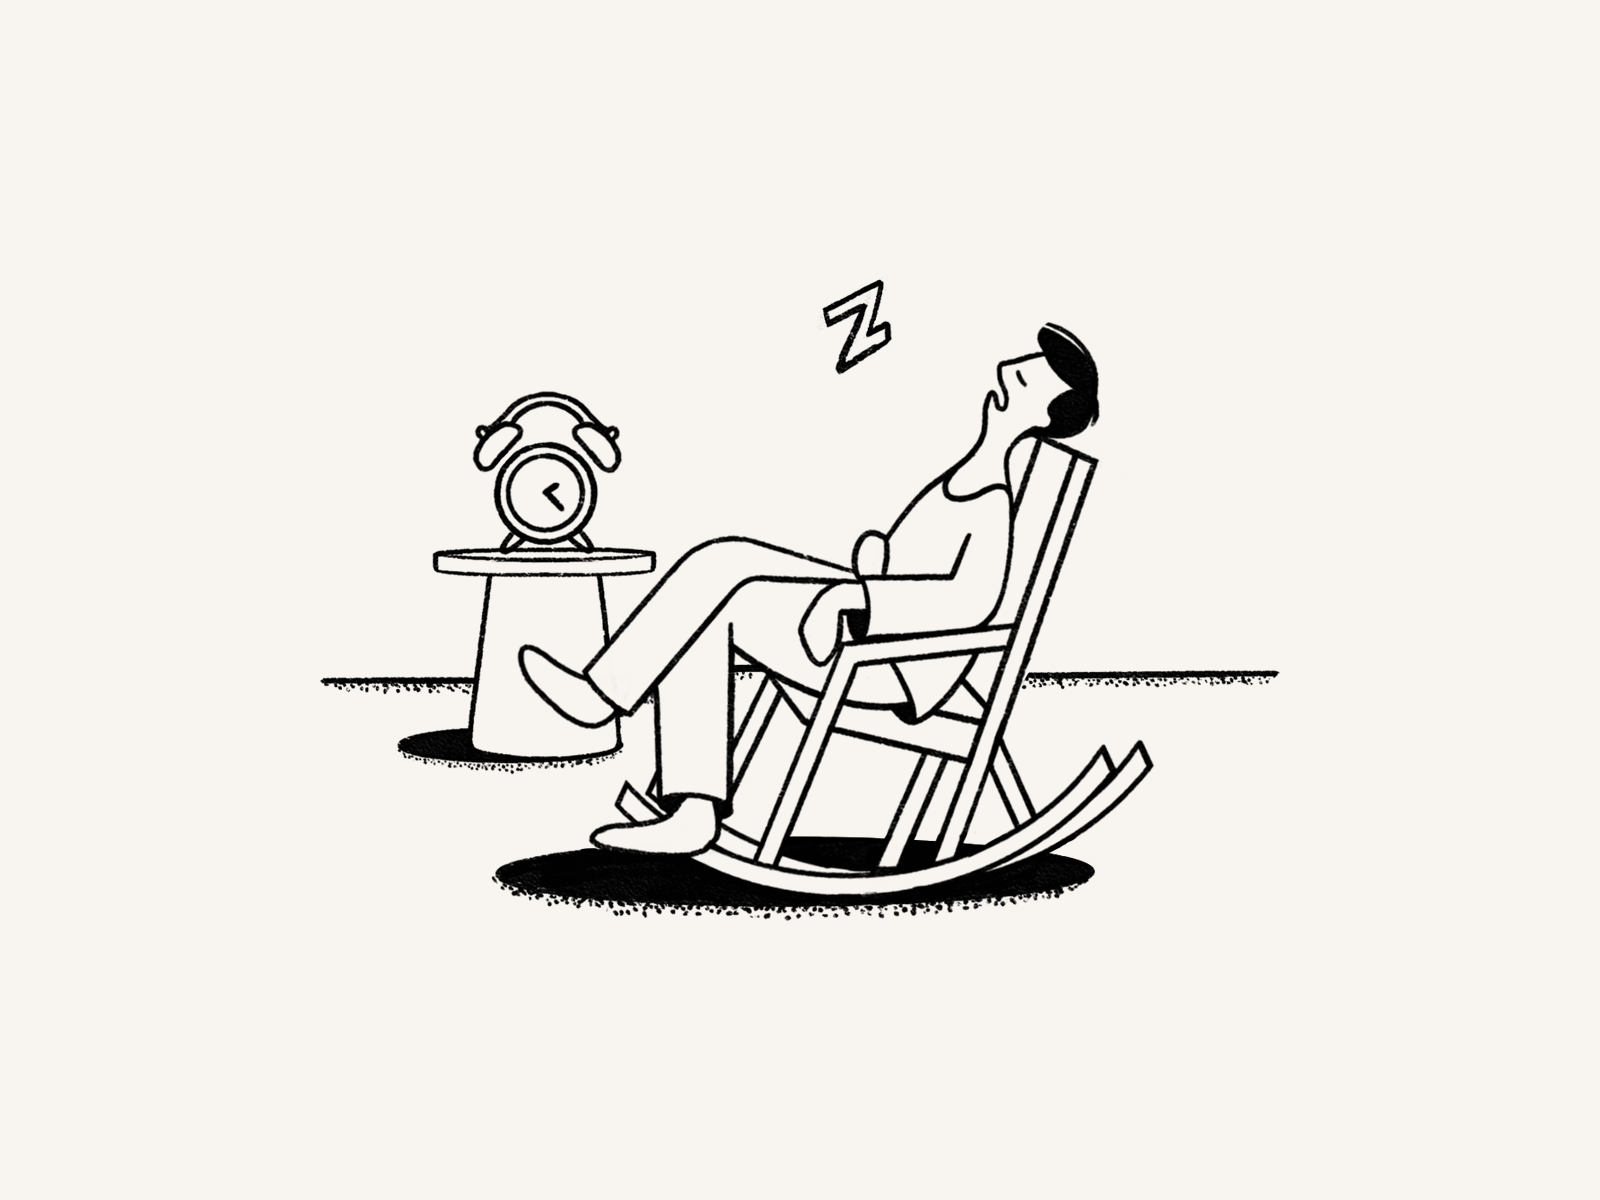 Taking a nap after lunch alarm break illustration lunch nap procreate rocking chair sleep sleeping snooze